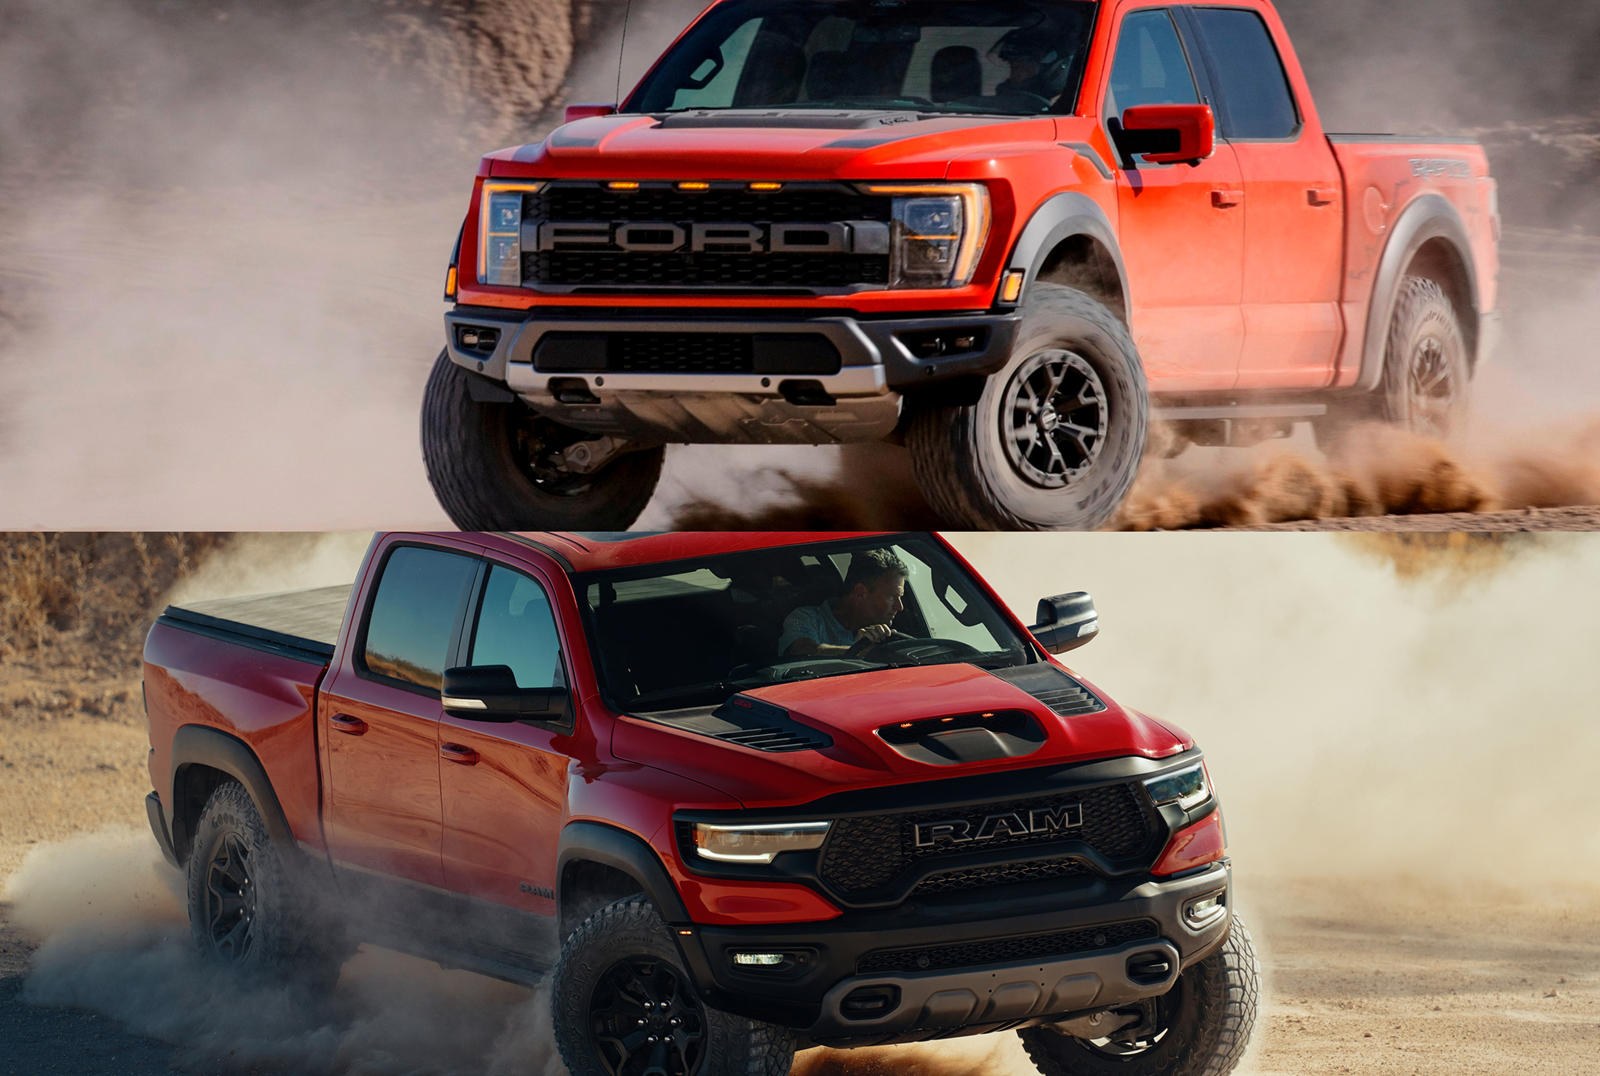 2021 Ford F-150 Raptor Vs. 2021 Ram 1500 TRX: Here's How They Match Up